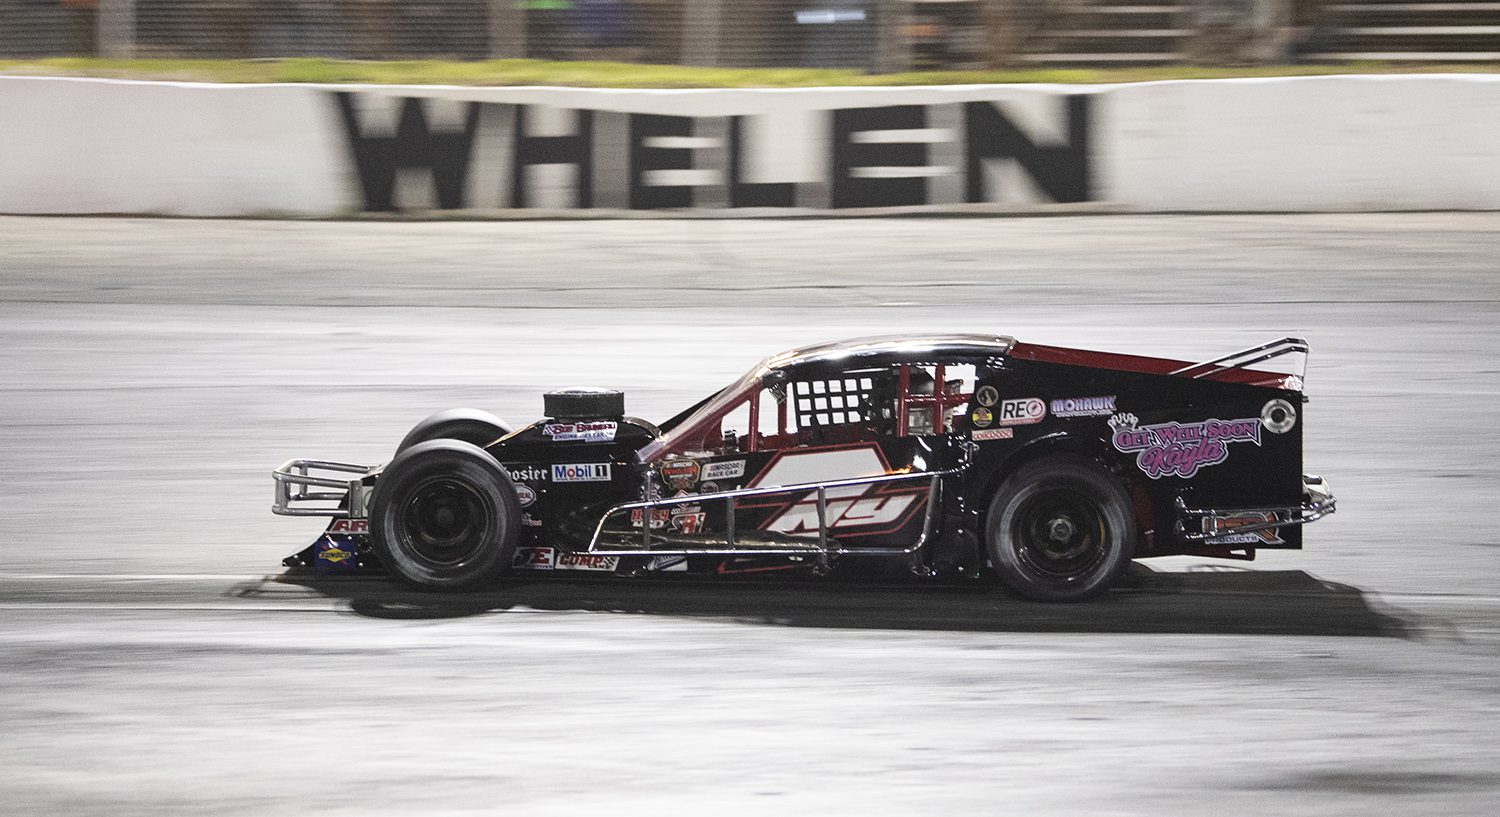 Doug Coby, driver of the #7 John Blewitt Inc during the Miller Lite 200 for the Whelen Modified Tour at Riverhead Raceway on May 14, 2022 in Riverhead, New York. (Mike Lawrence/NASCAR)